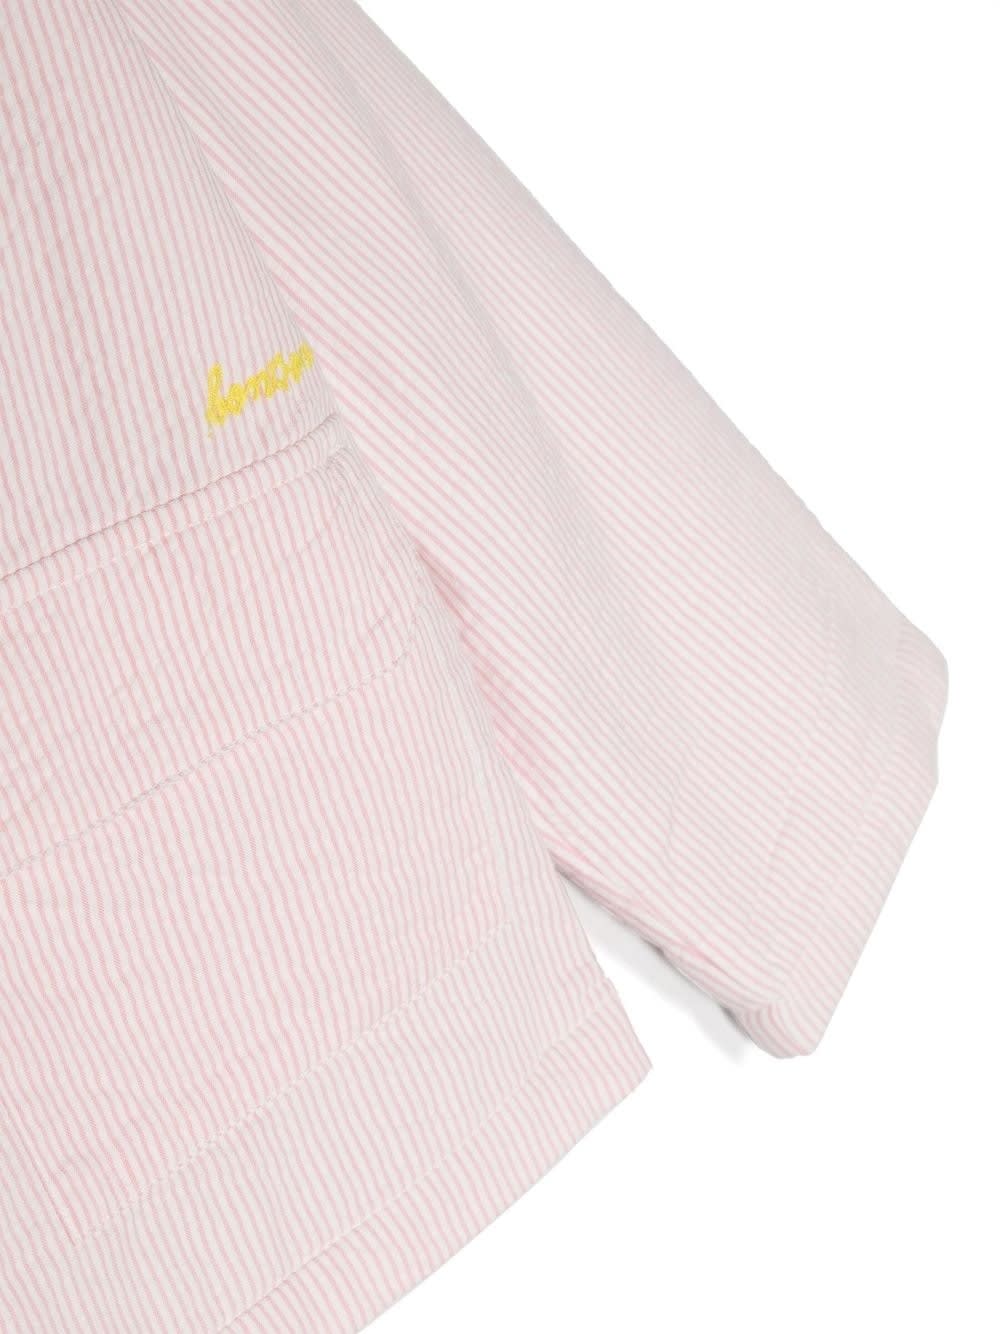 Shop Bonton Striped Jacket With Embroidered Logo In Pink